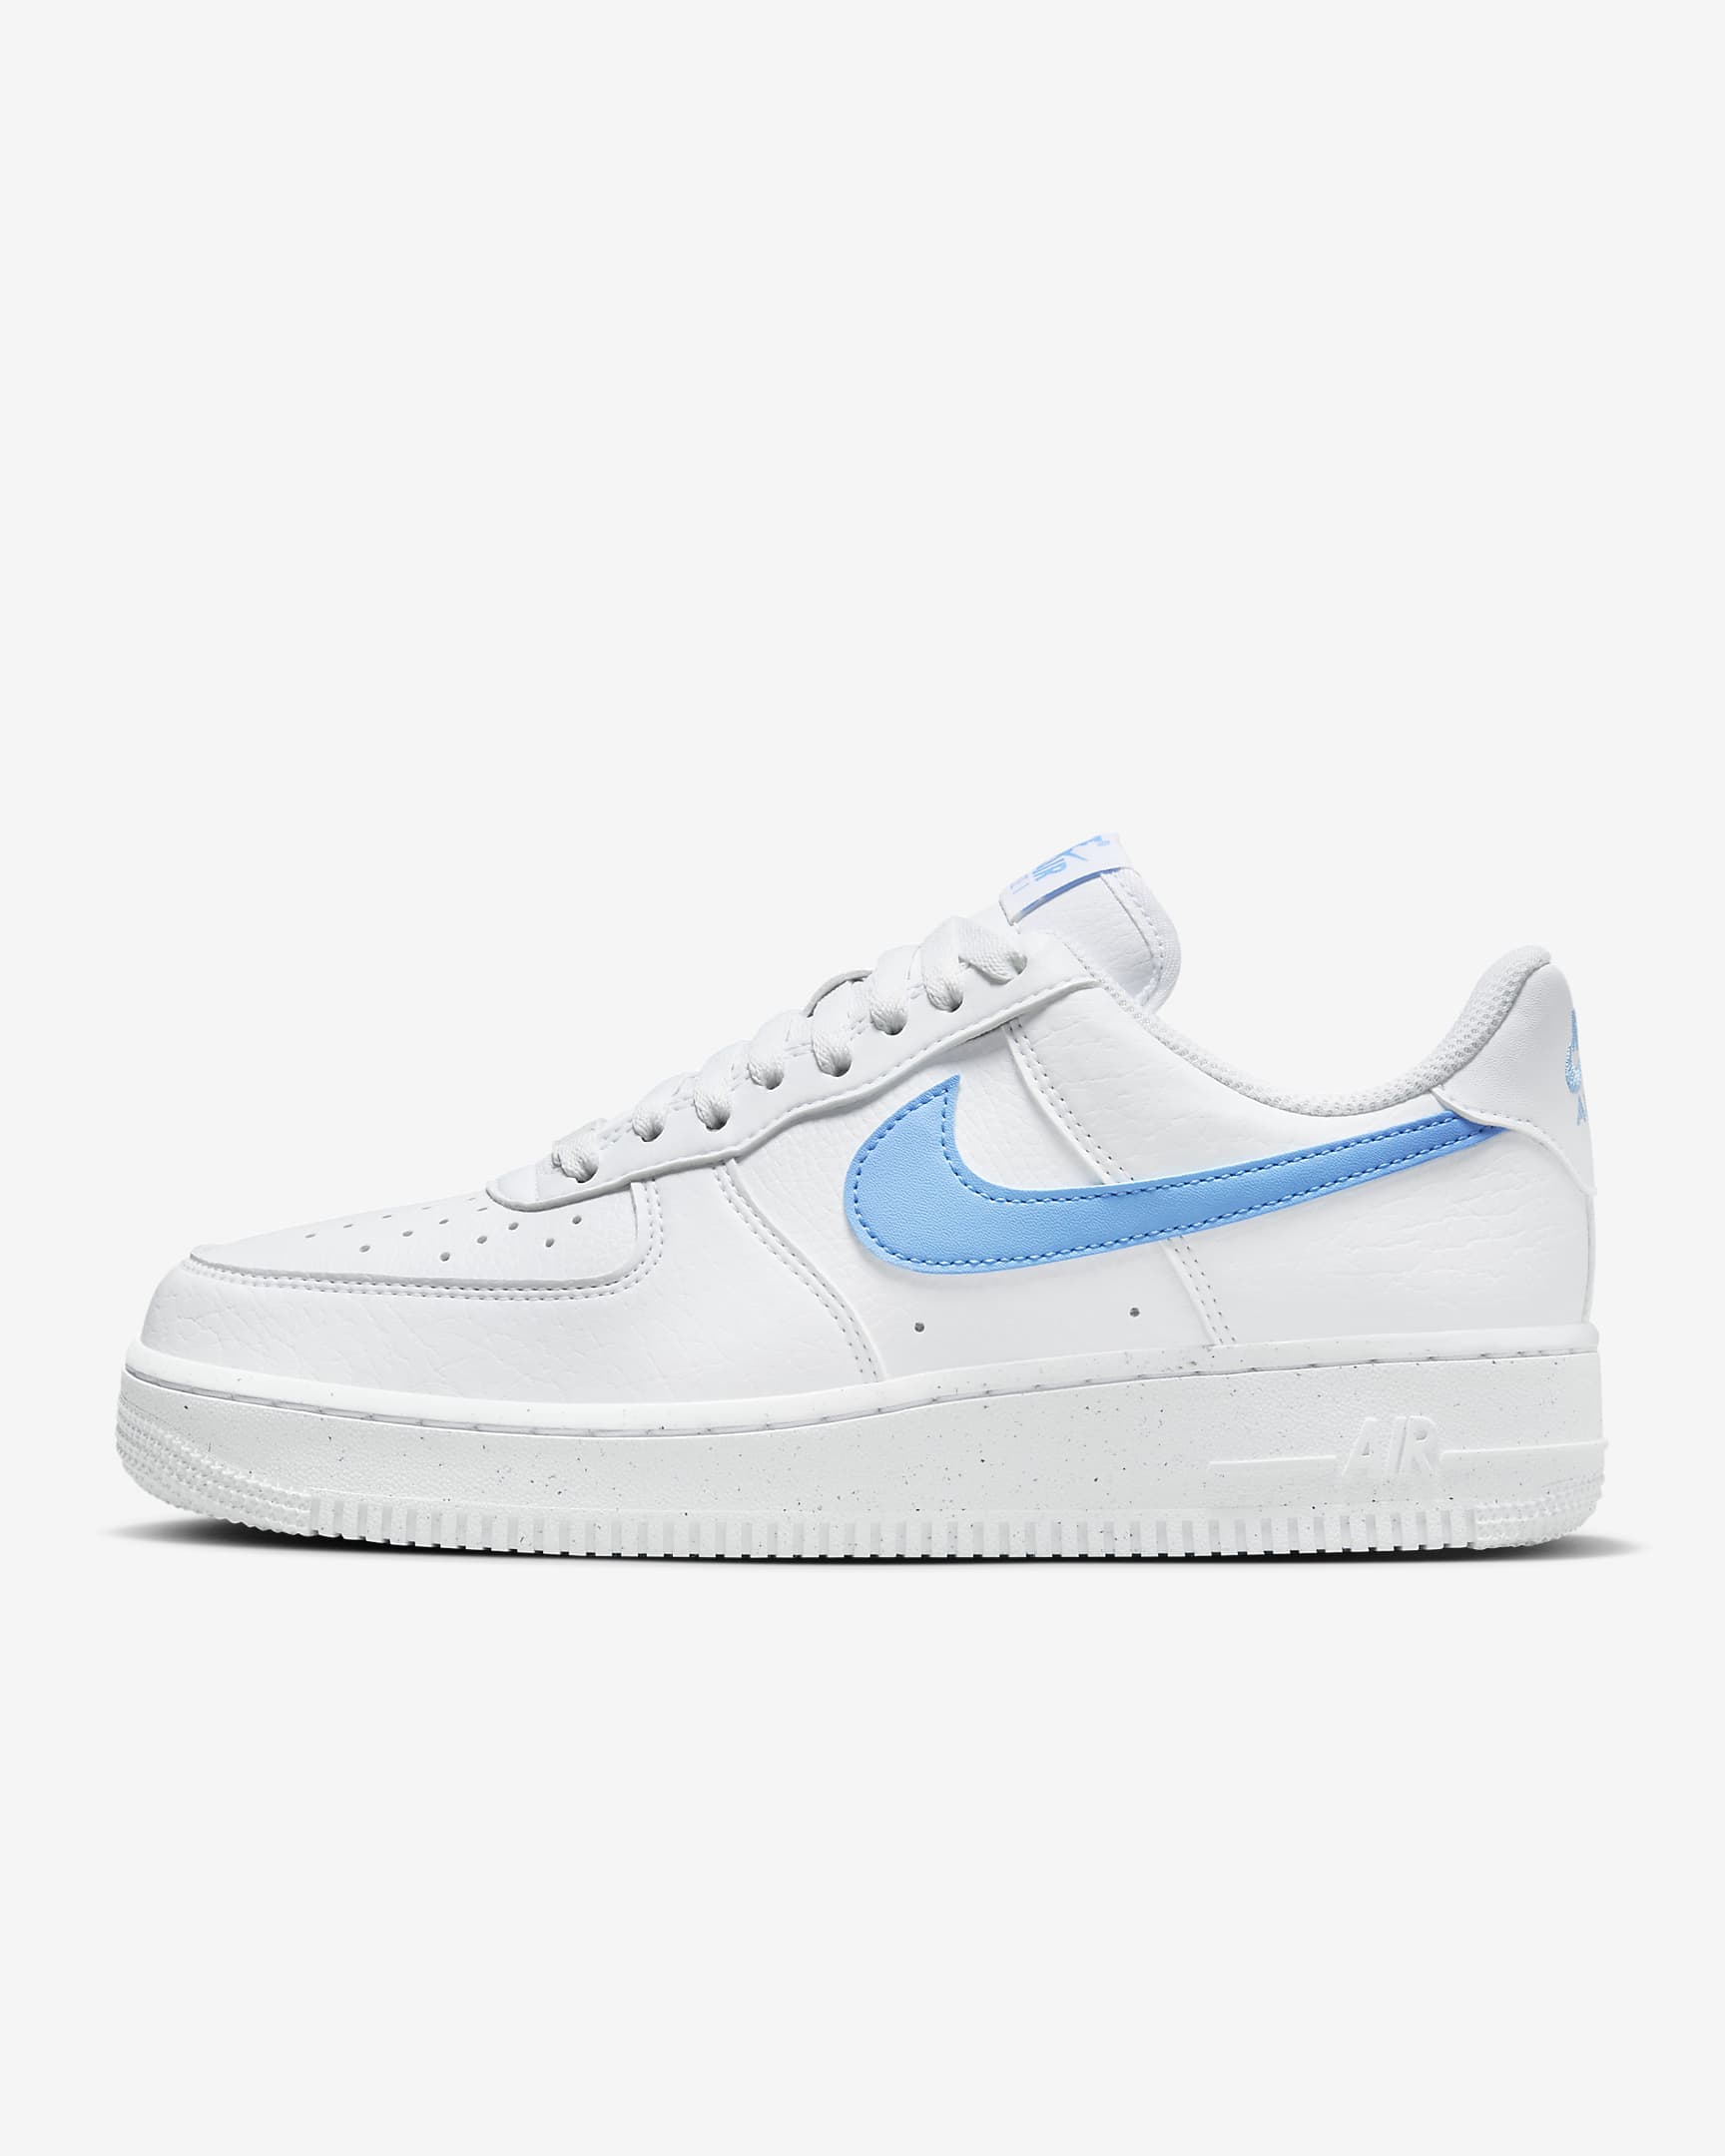 Nike Air Force 1 '07 Next Nature Women's Shoes. Nike IL